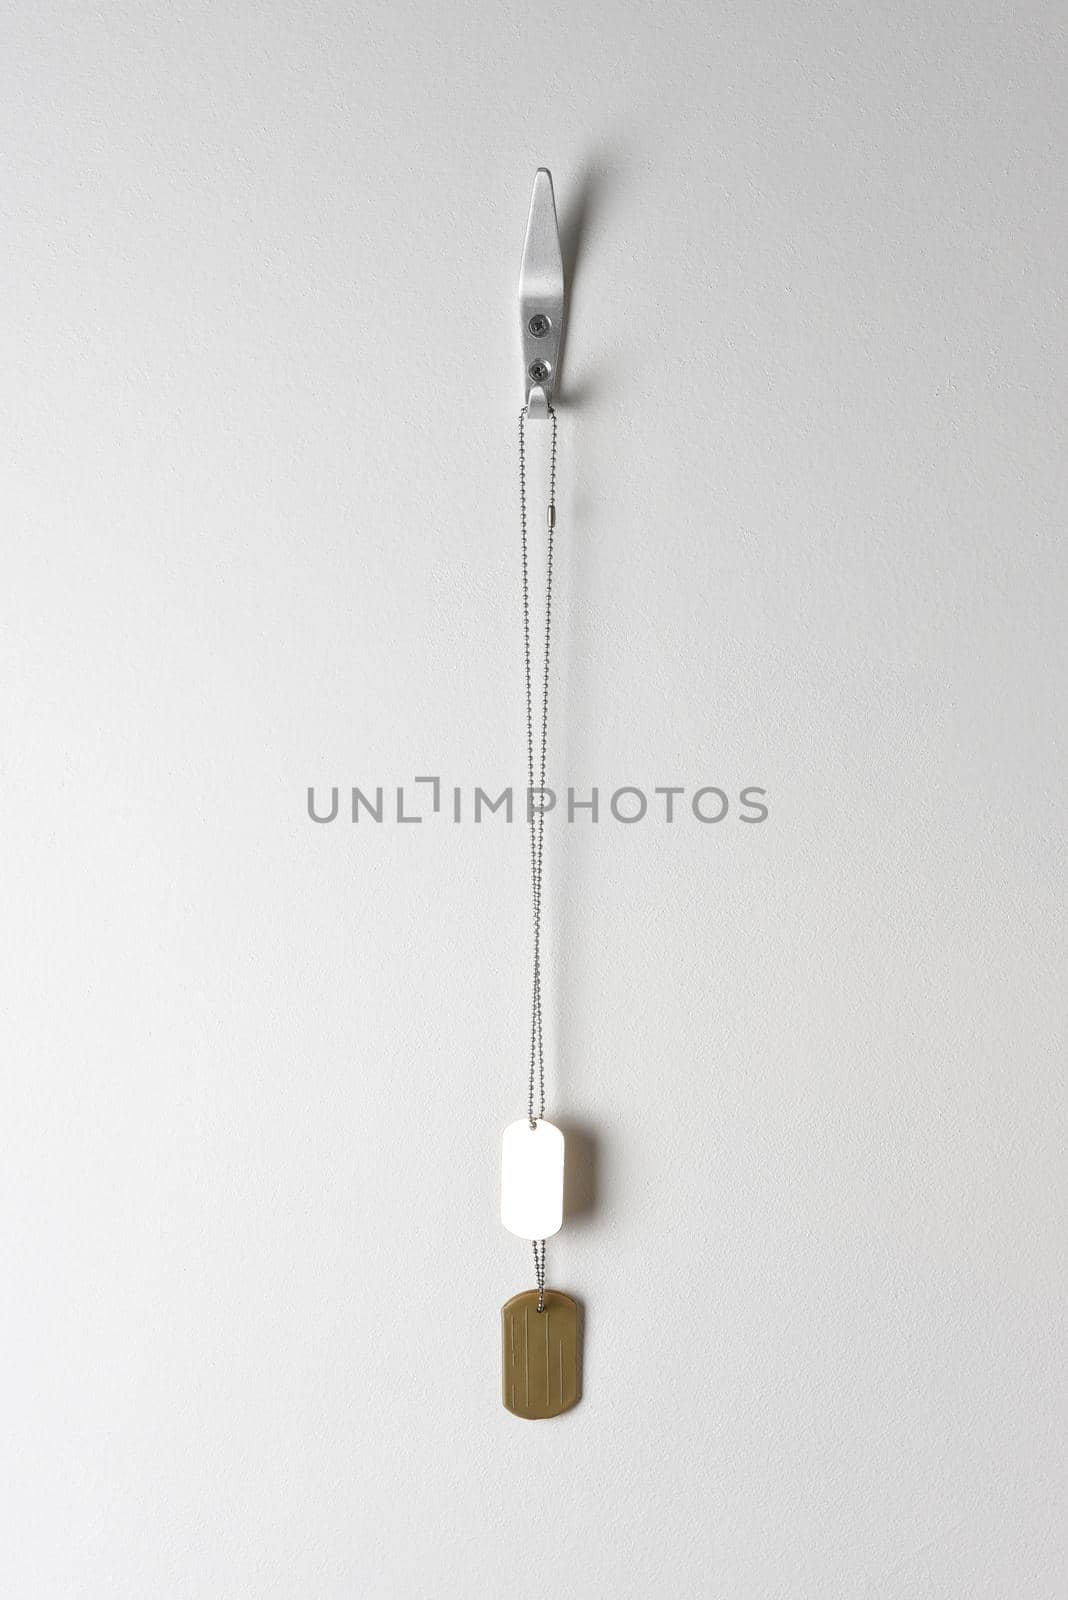 A single set of military dog tags hanging from a hook on a blank wall.